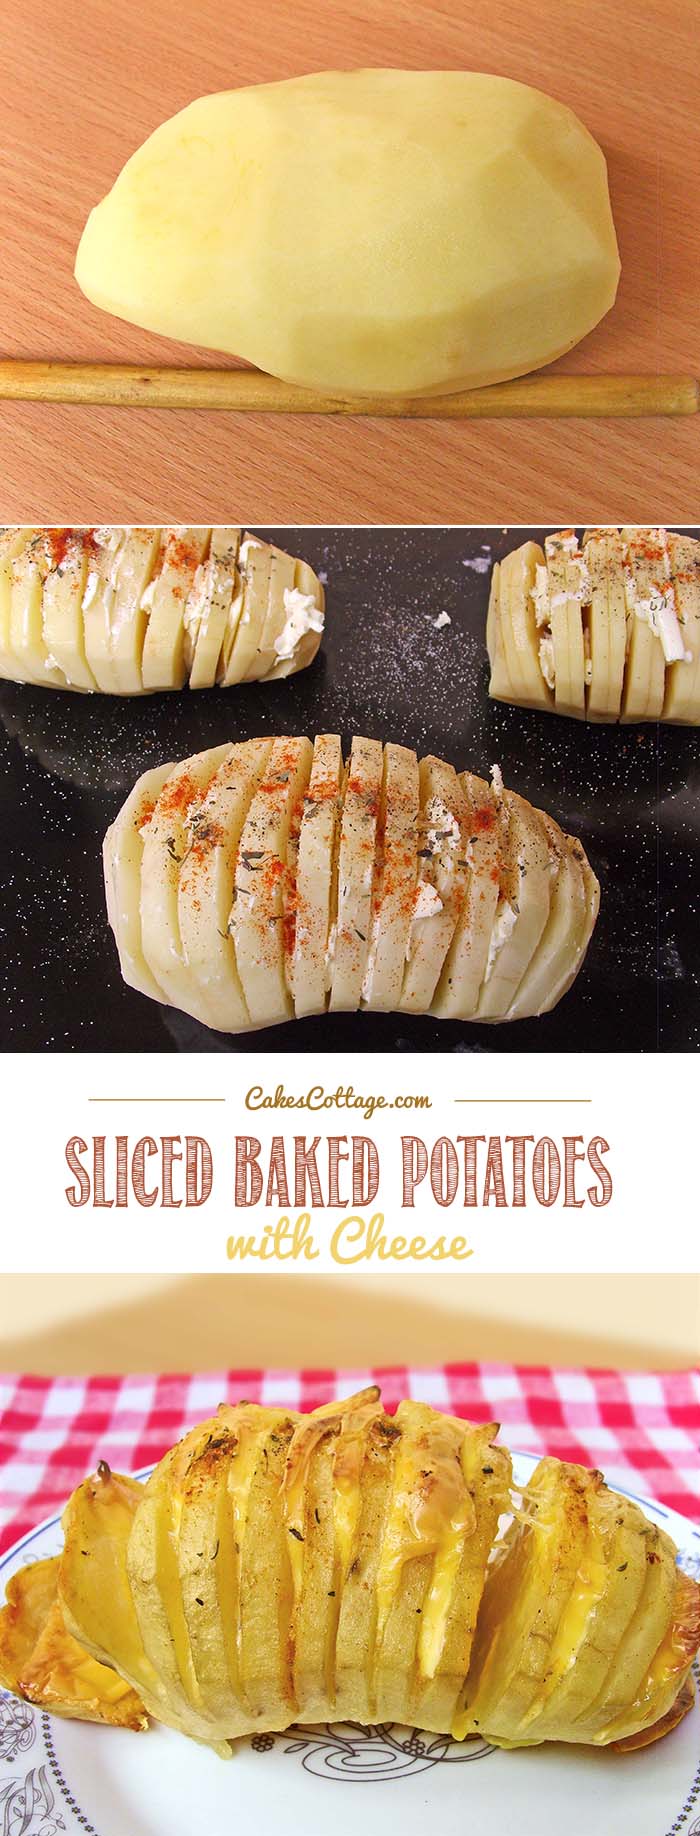 Sliced Baked Potatoes with Cheese - Cakescottage